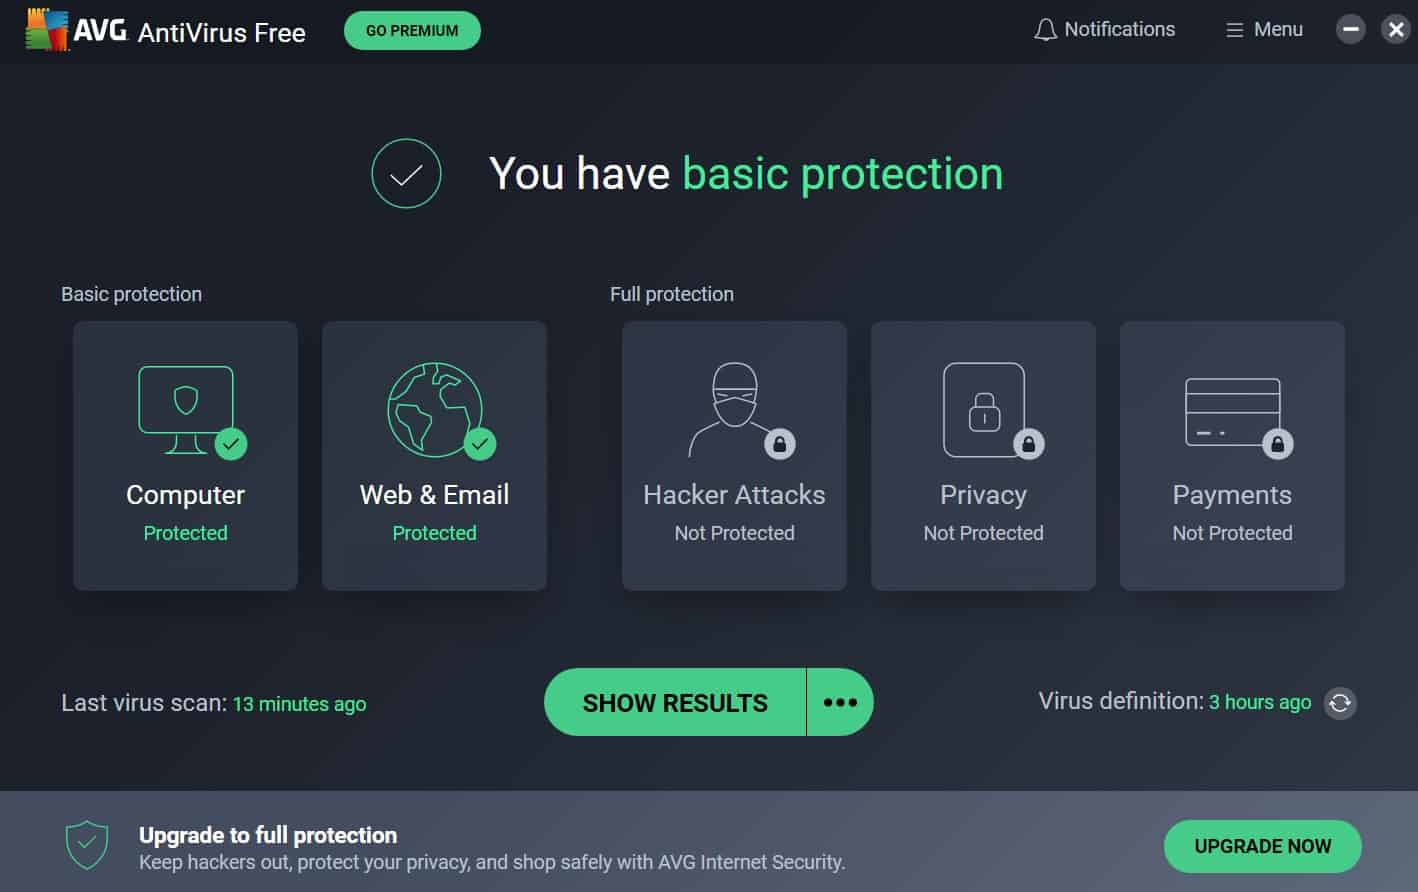 AVG AntiVirus Free: AVG provides reliable protection against viruses and malware, along with web and email protection features.
Comodo Free Antivirus: Comodo offers a powerful antivirus engine, sandboxing technology, and secure browsing features.